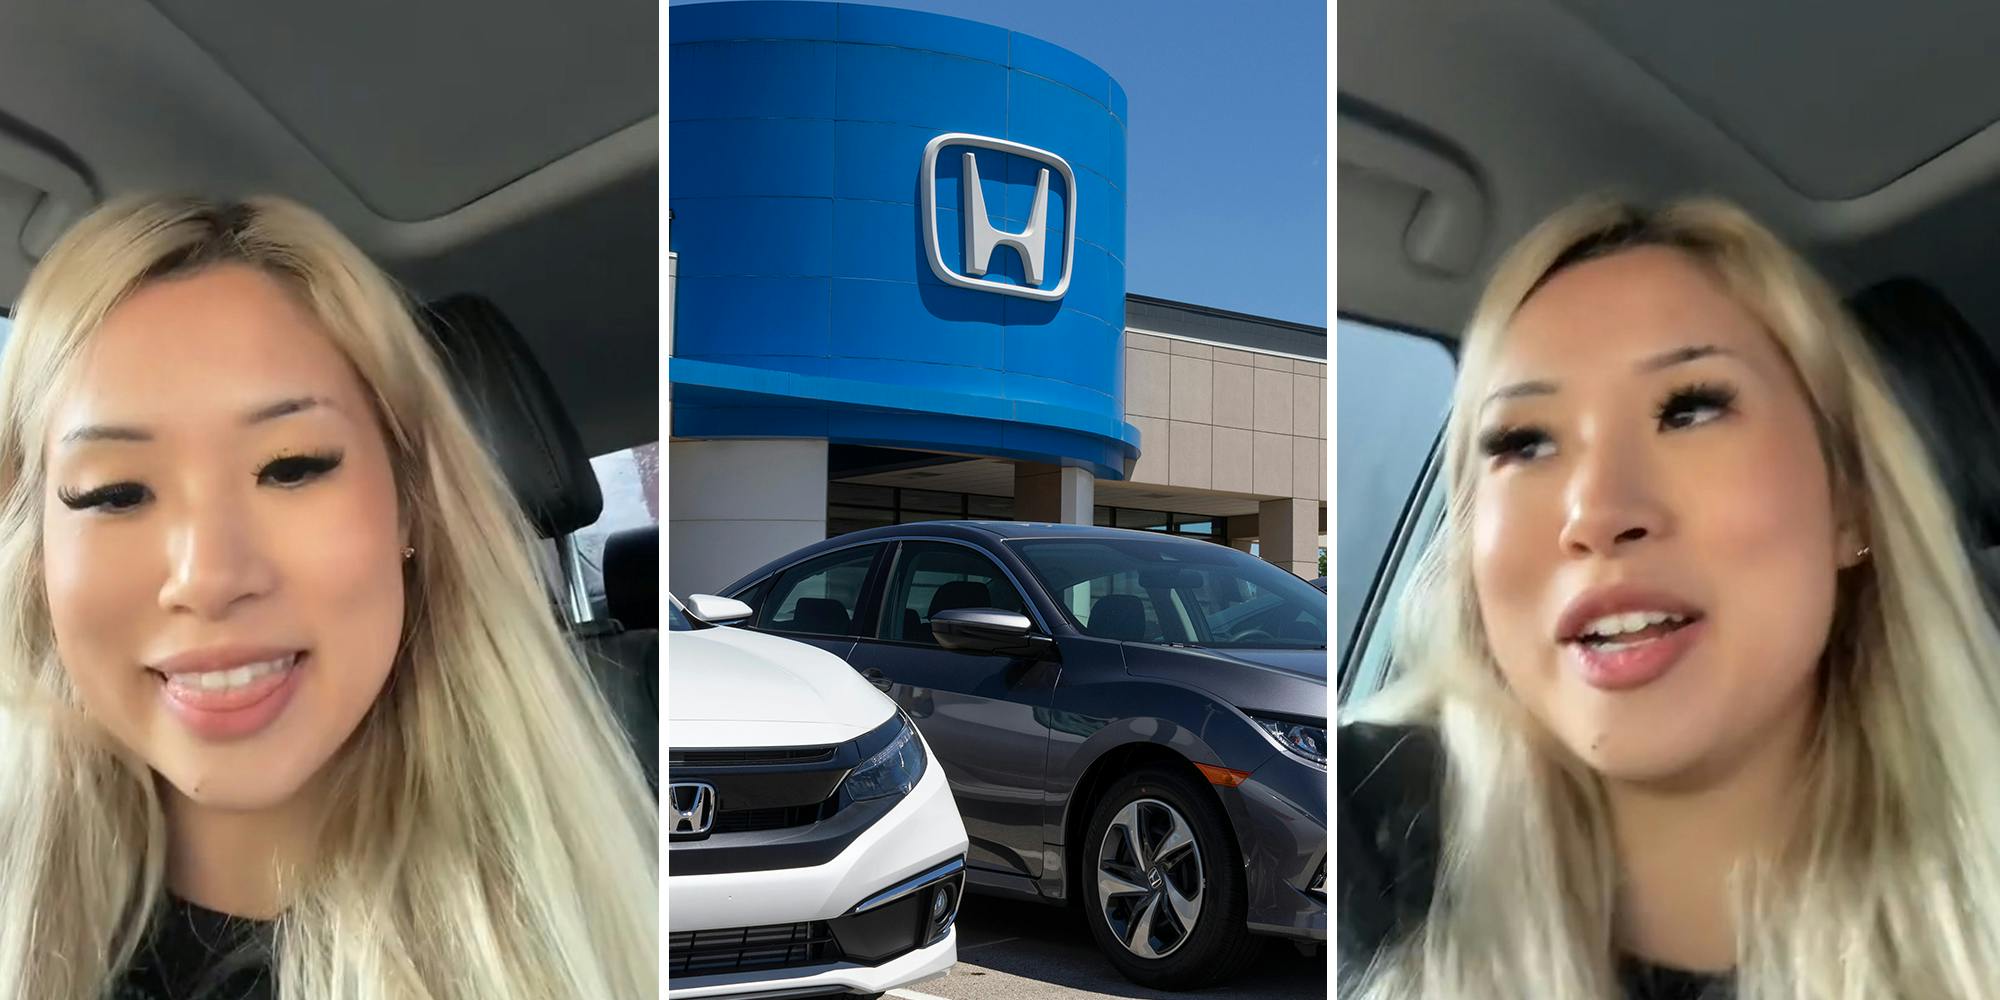 Woman finds her Honda Civic broken into, is puzzled by what they chose to steal